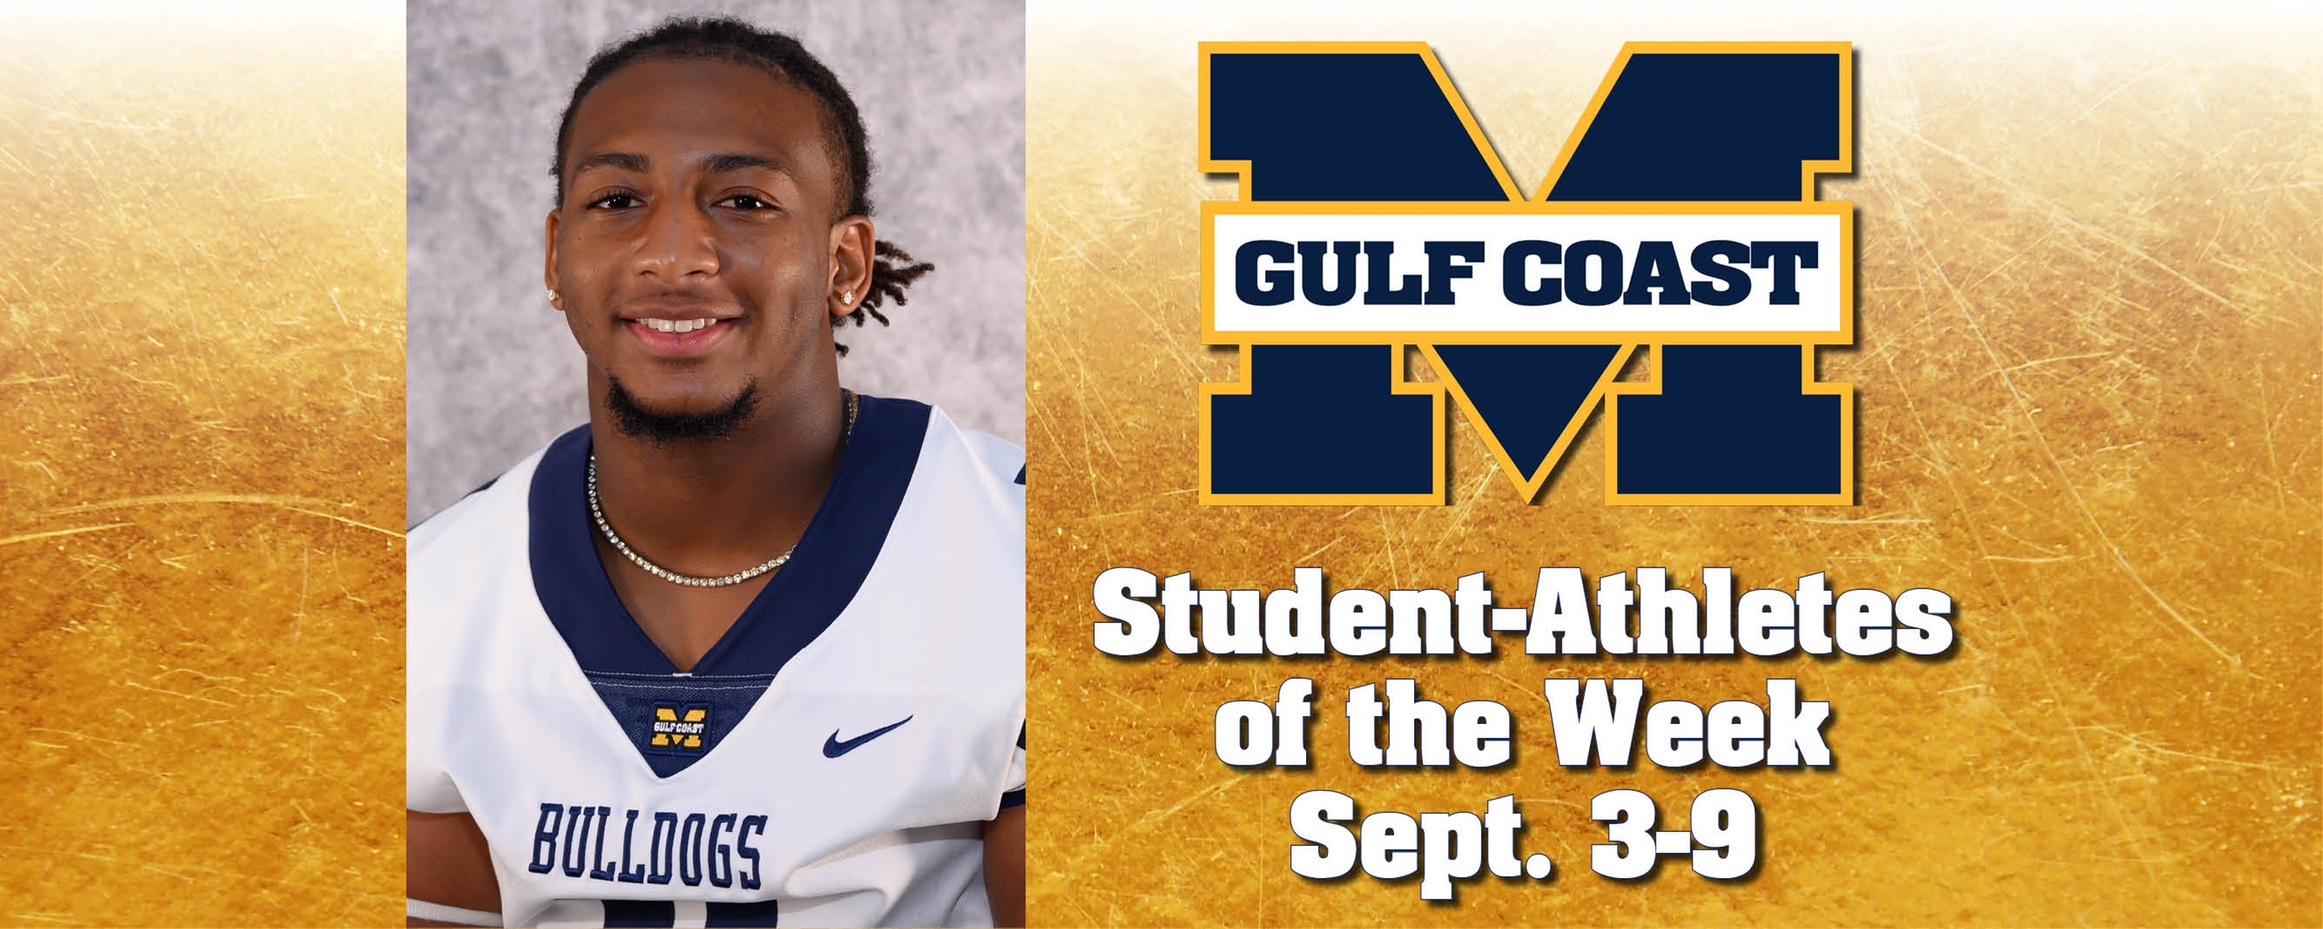 Bolton named MGCCC Student-Athlete of the Week